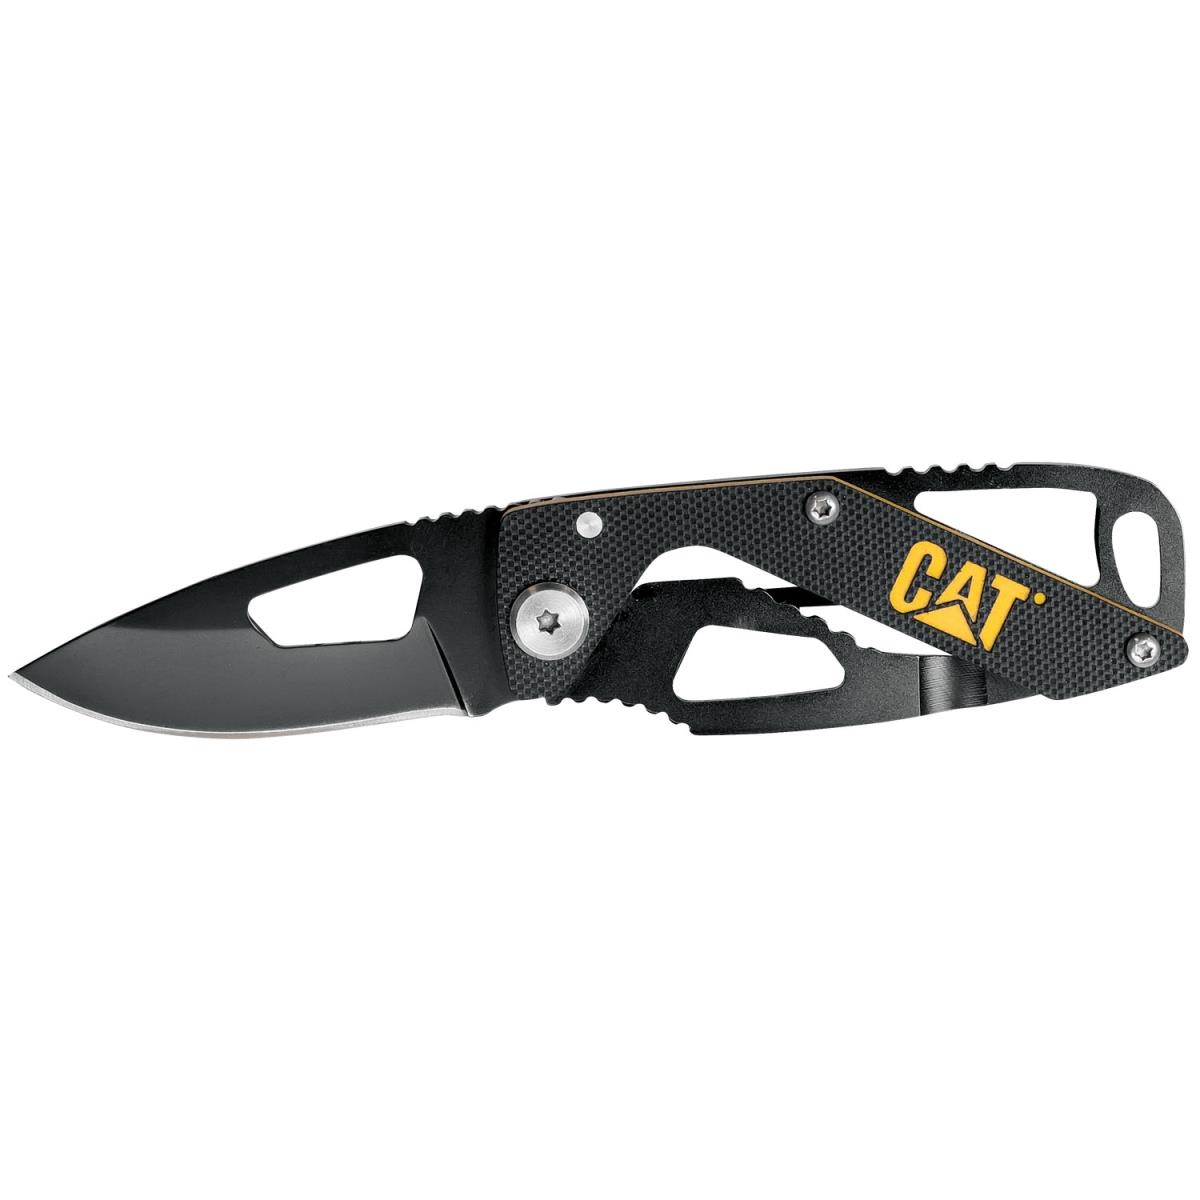 Picture of Cat 980265 Cat 980265 5- 0.25 in. Folding Skeleton Knife with Black Stainless Steel Blade